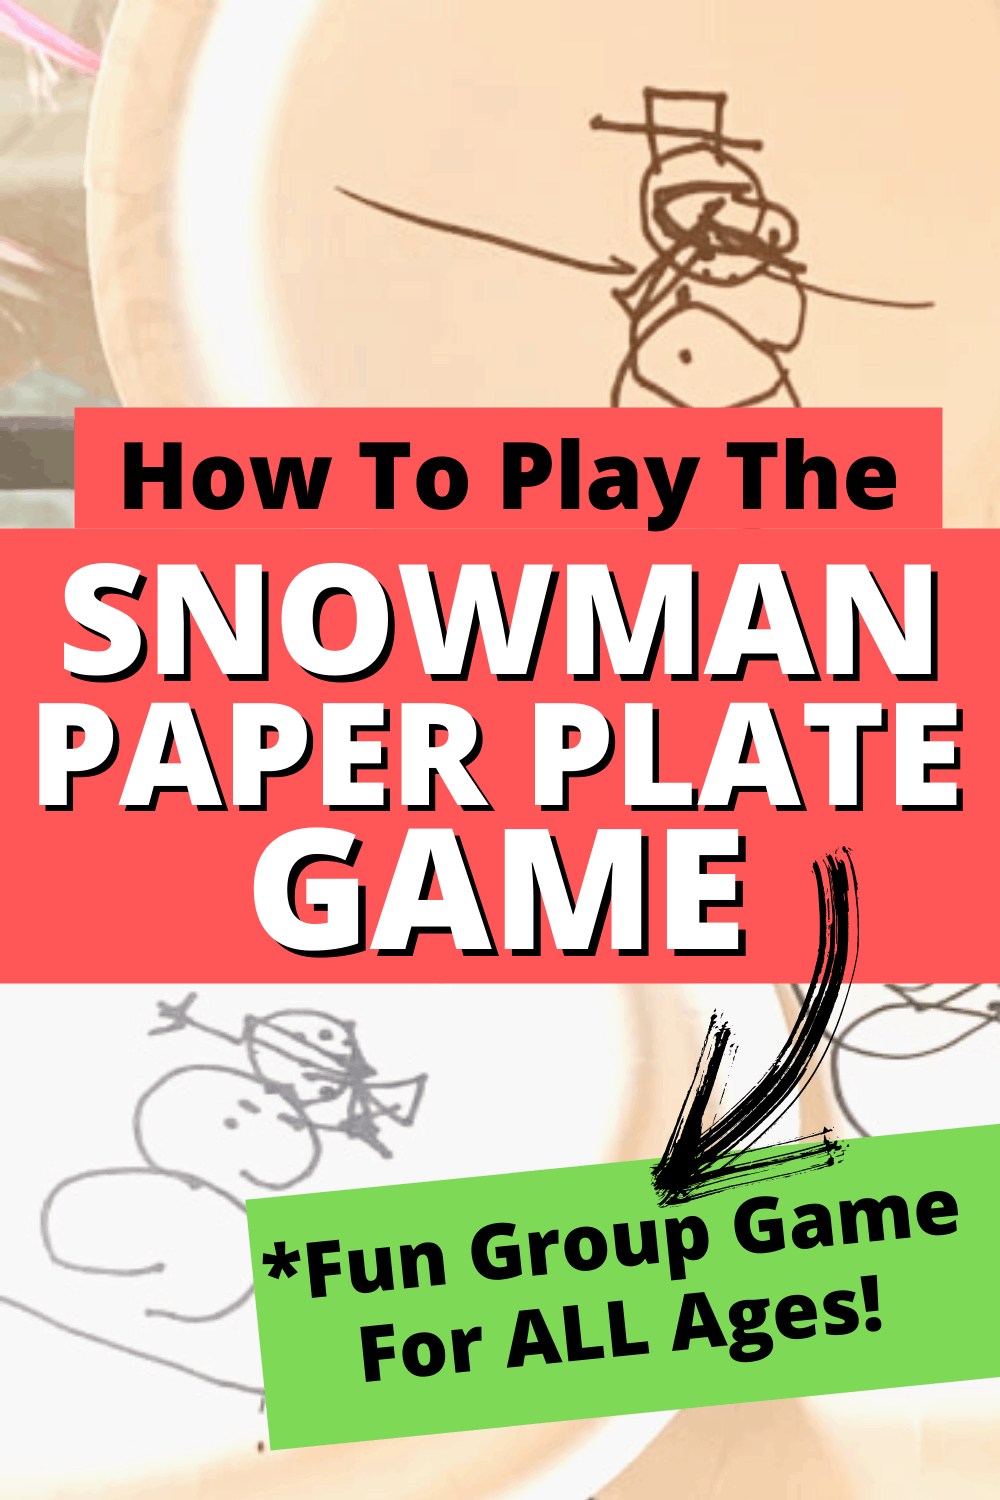 HOW TO PLAY THE PAPER PLATE SNOWMAN DRAWING GAME text over paper plates with funny snowman drawings